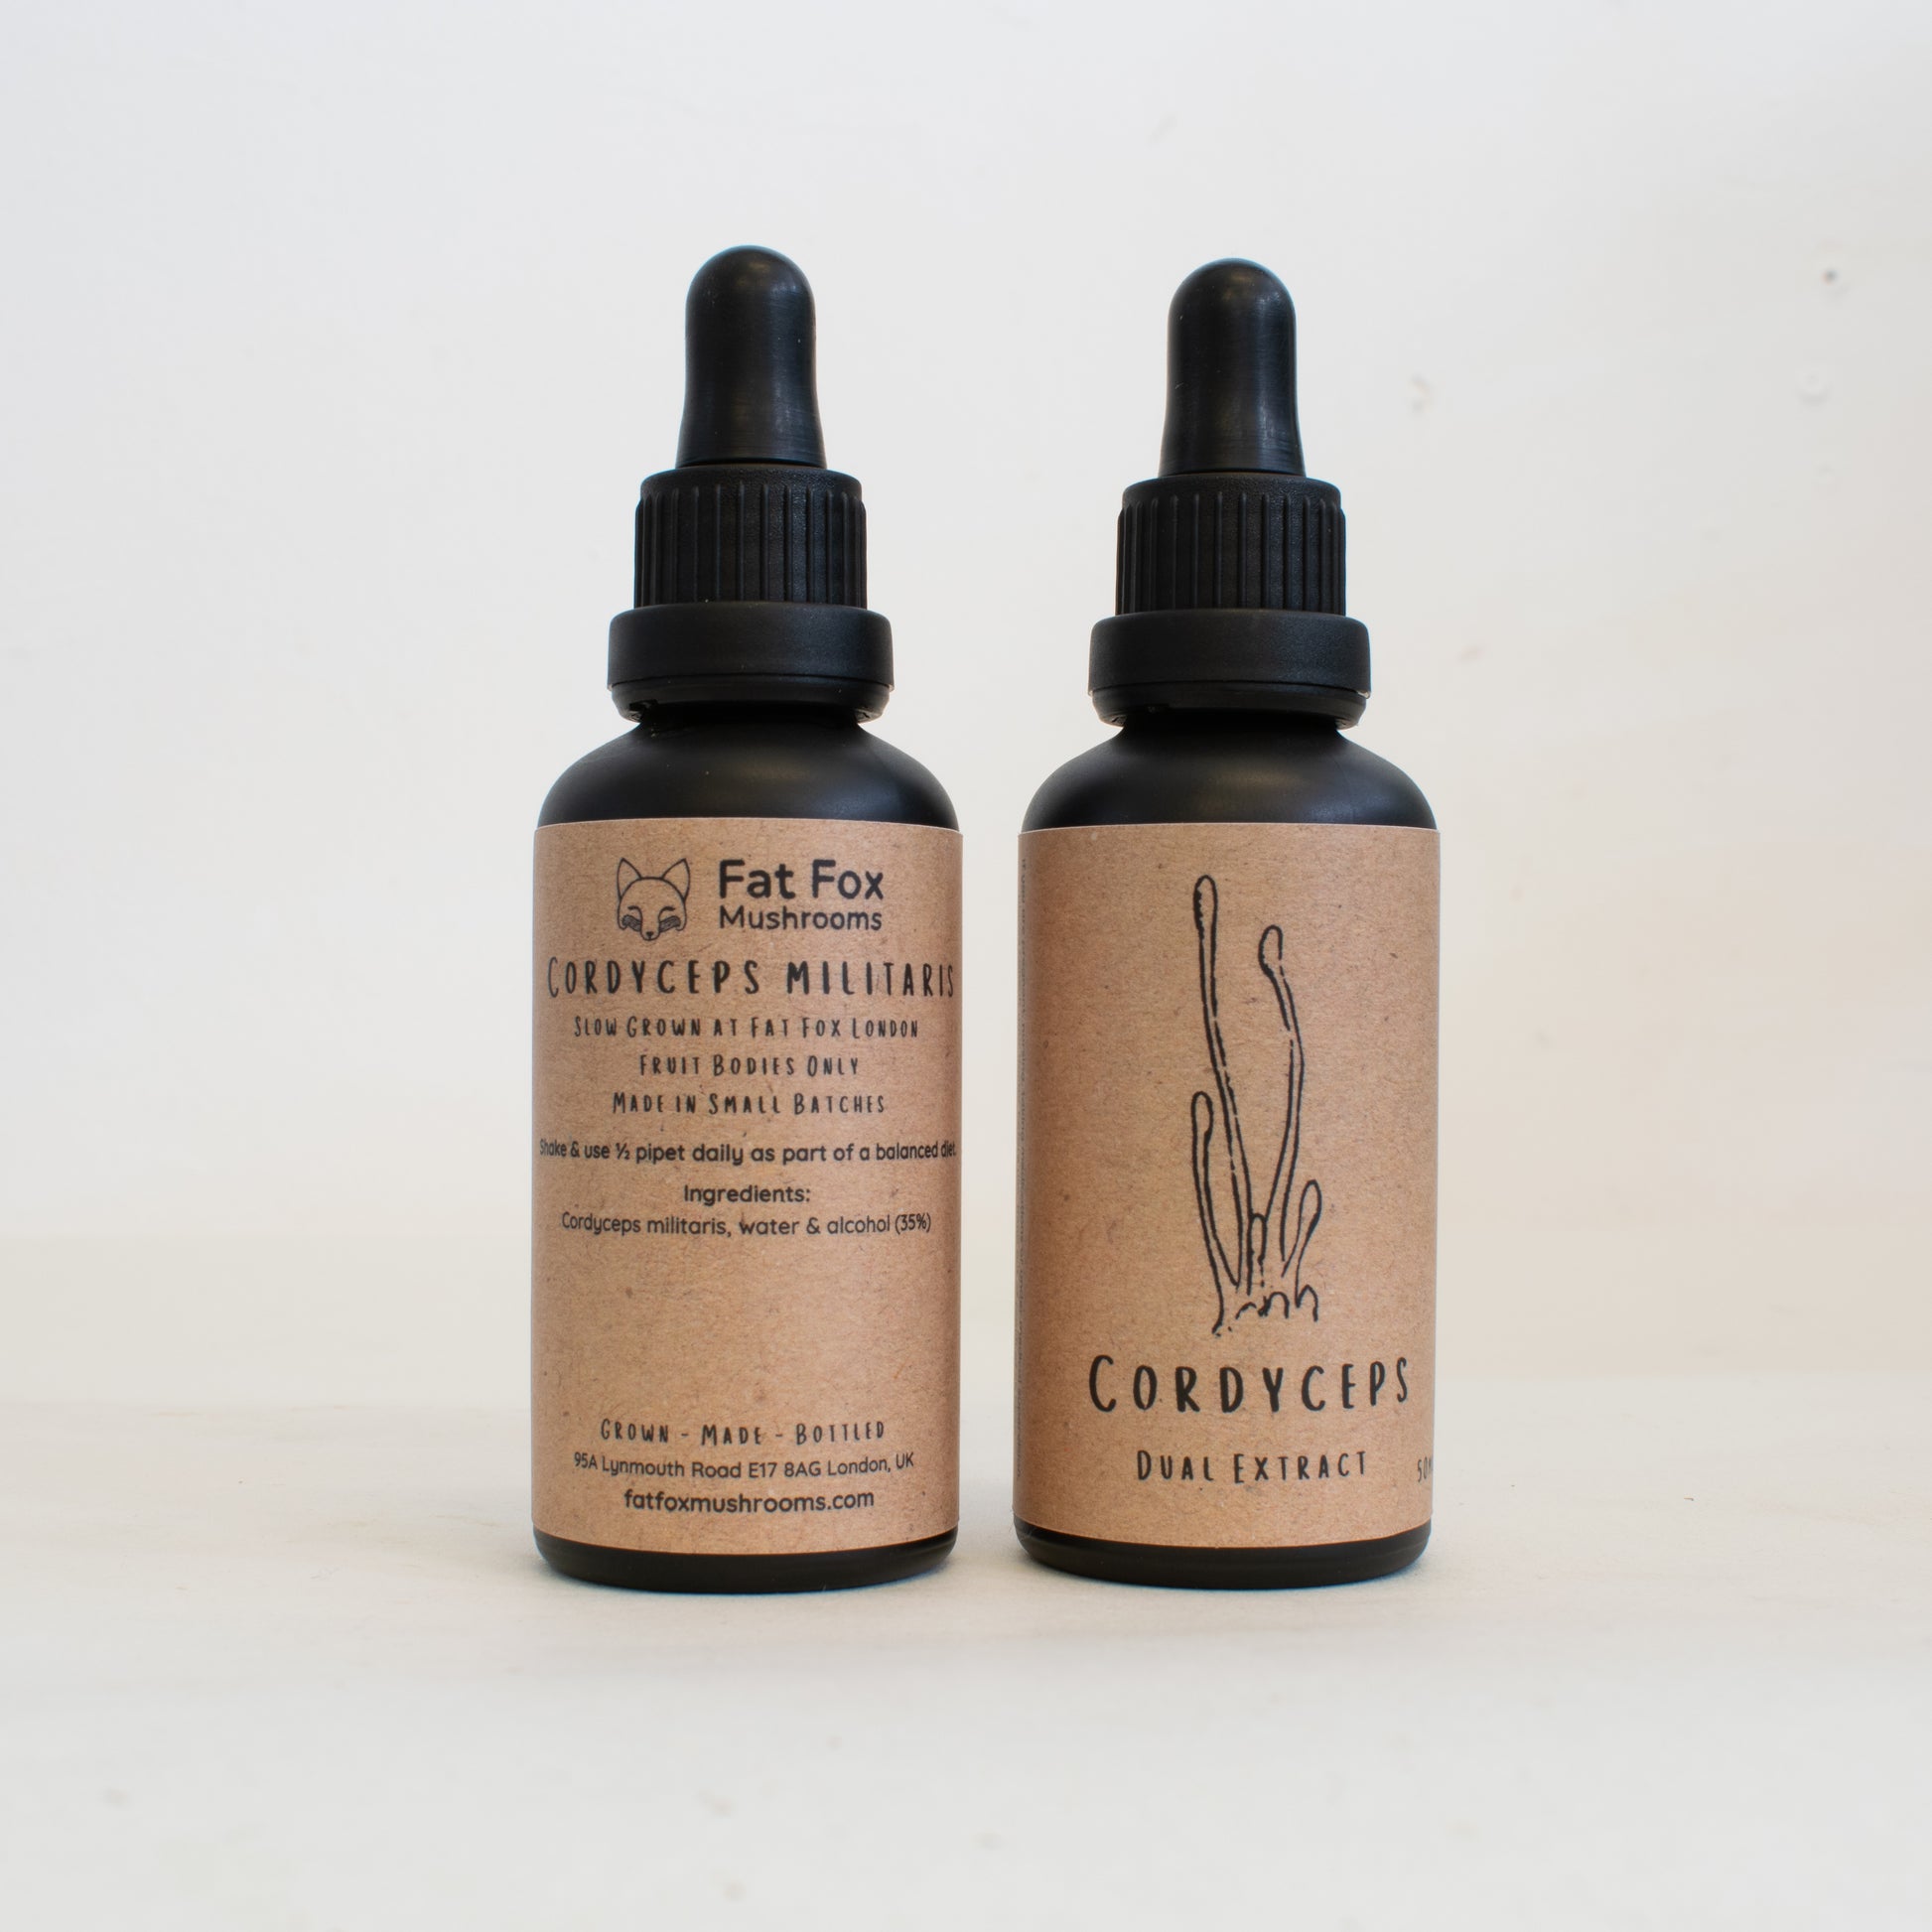 Bottles of cordyceps dual-extract tinctures made by Fat Fox Mushrooms.